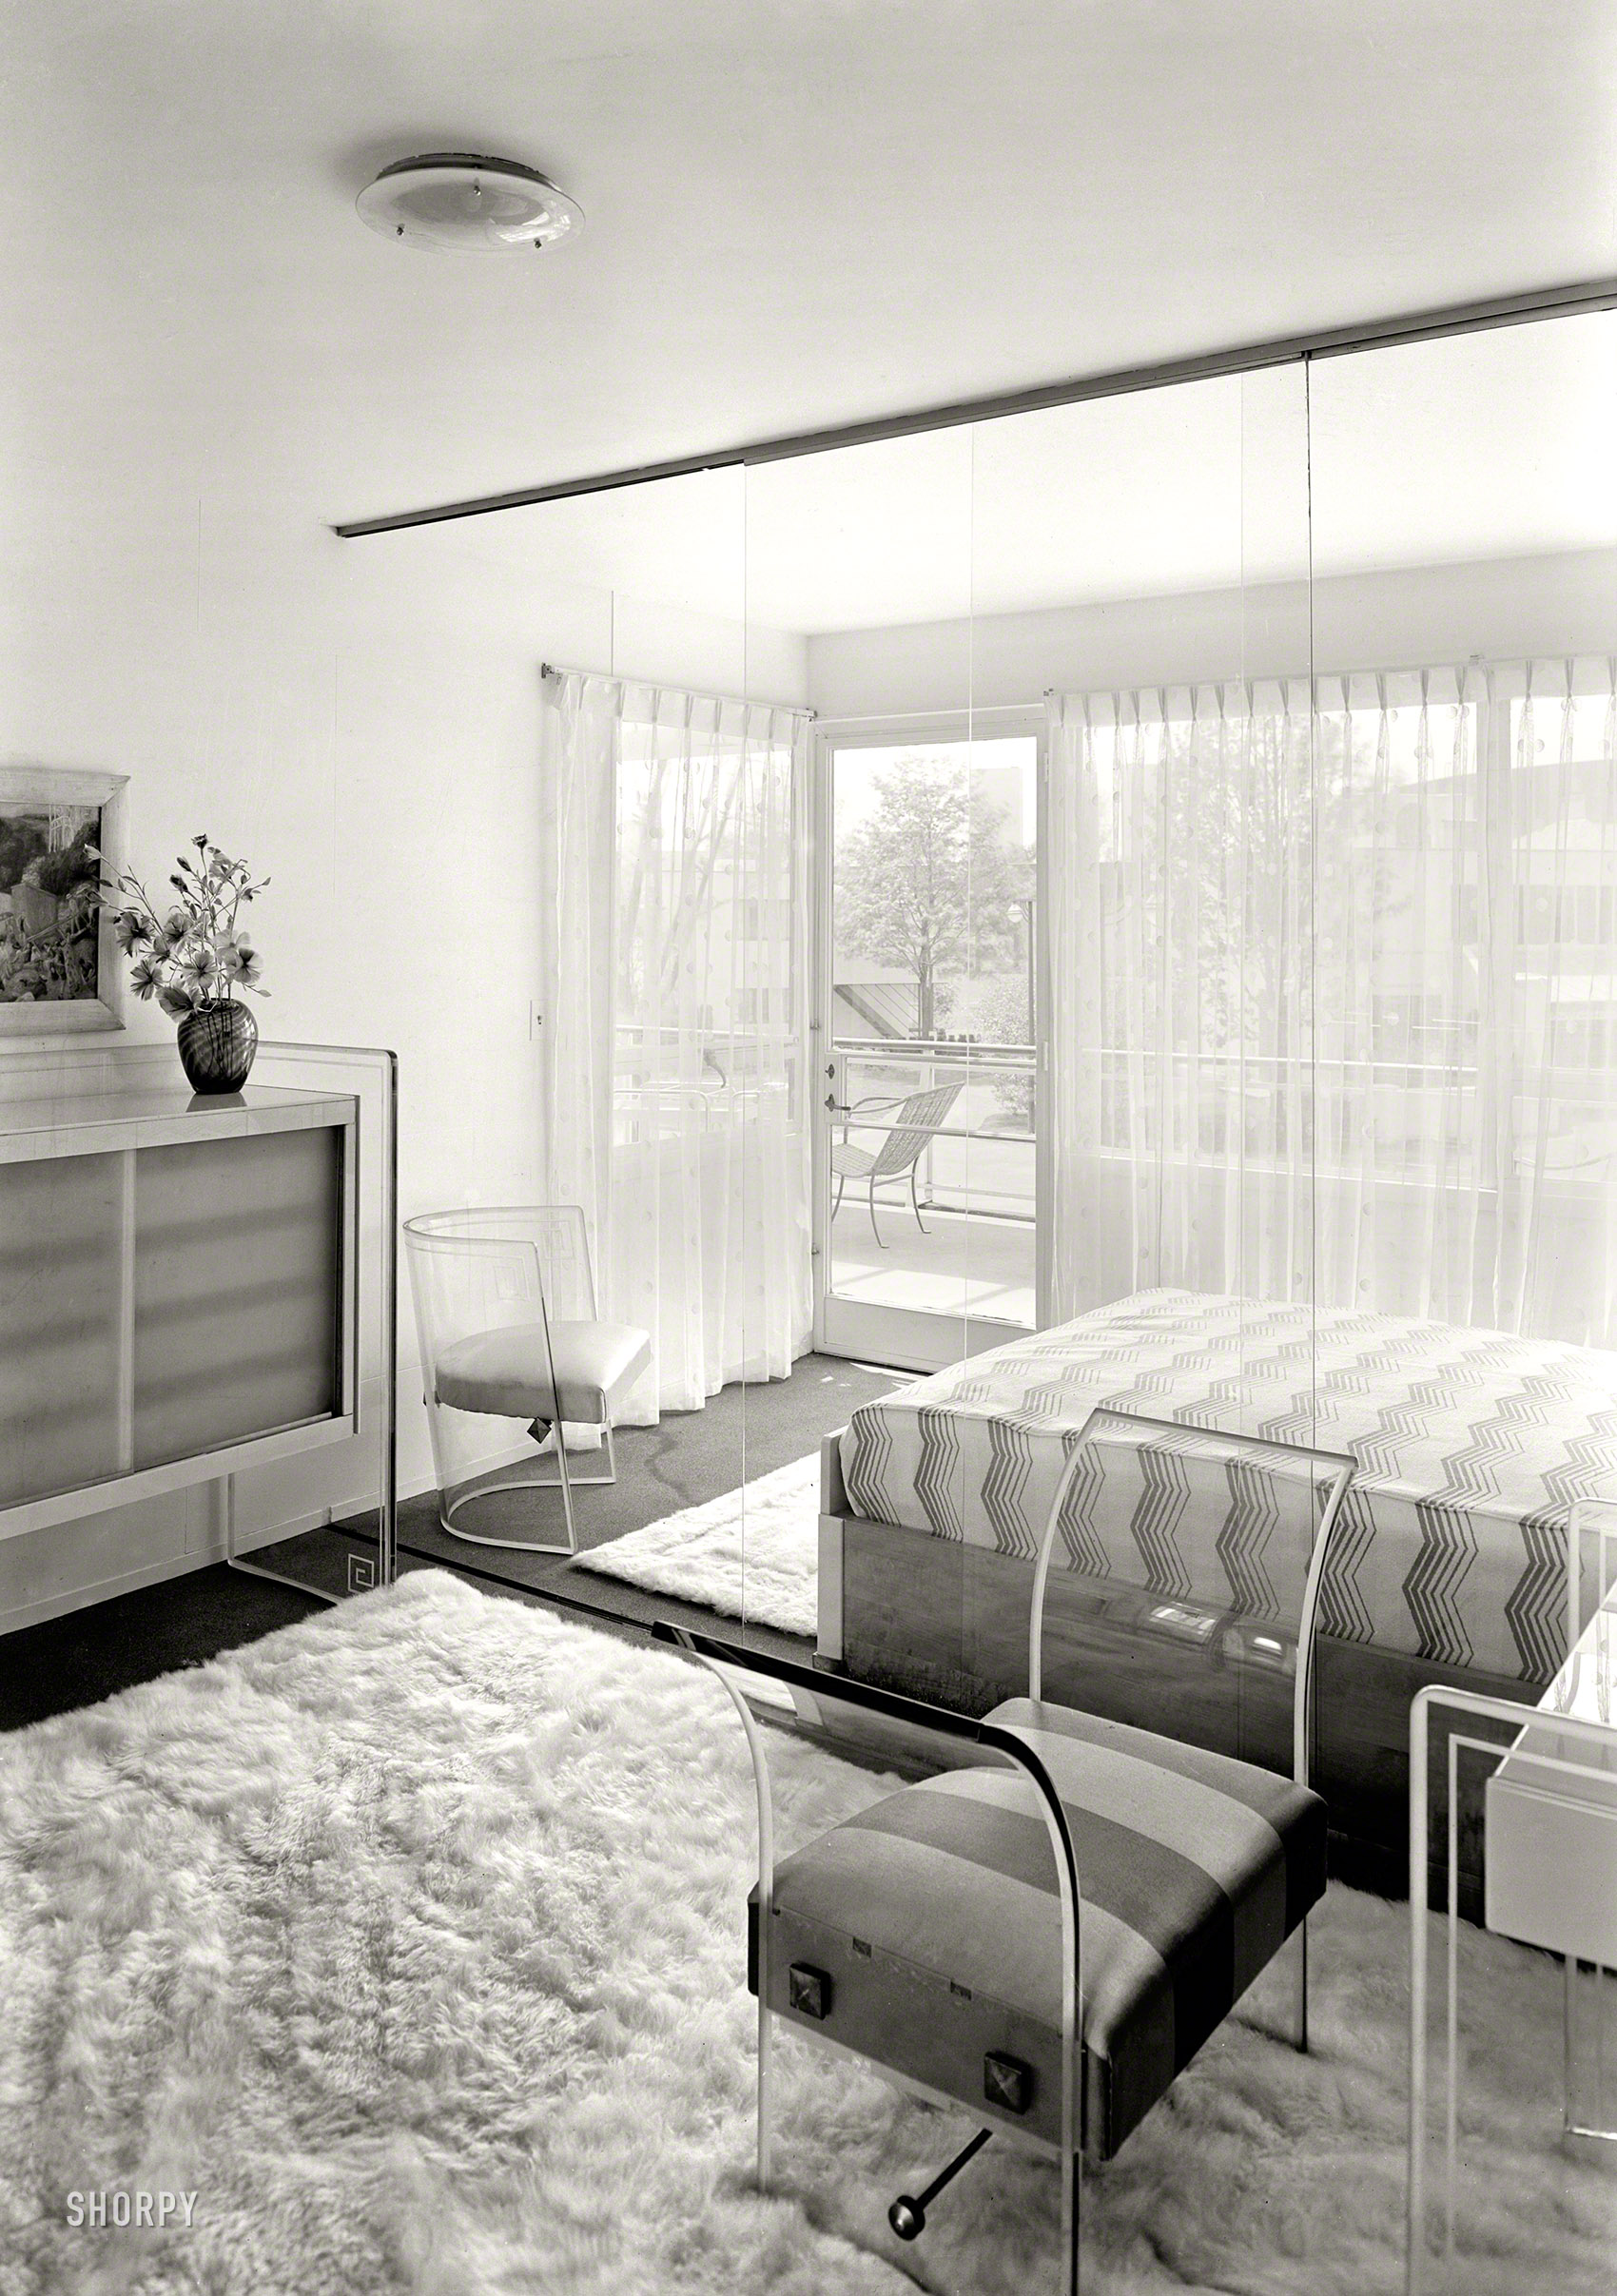 June 12, 1939. "New York World's Fair, House of Glass No. 4. Combination bedroom and sleeping porch. Landefeld & Hatch, architect." Also known as the House of Bloody Noses. Gottscho-Schleisner photo. View full size.